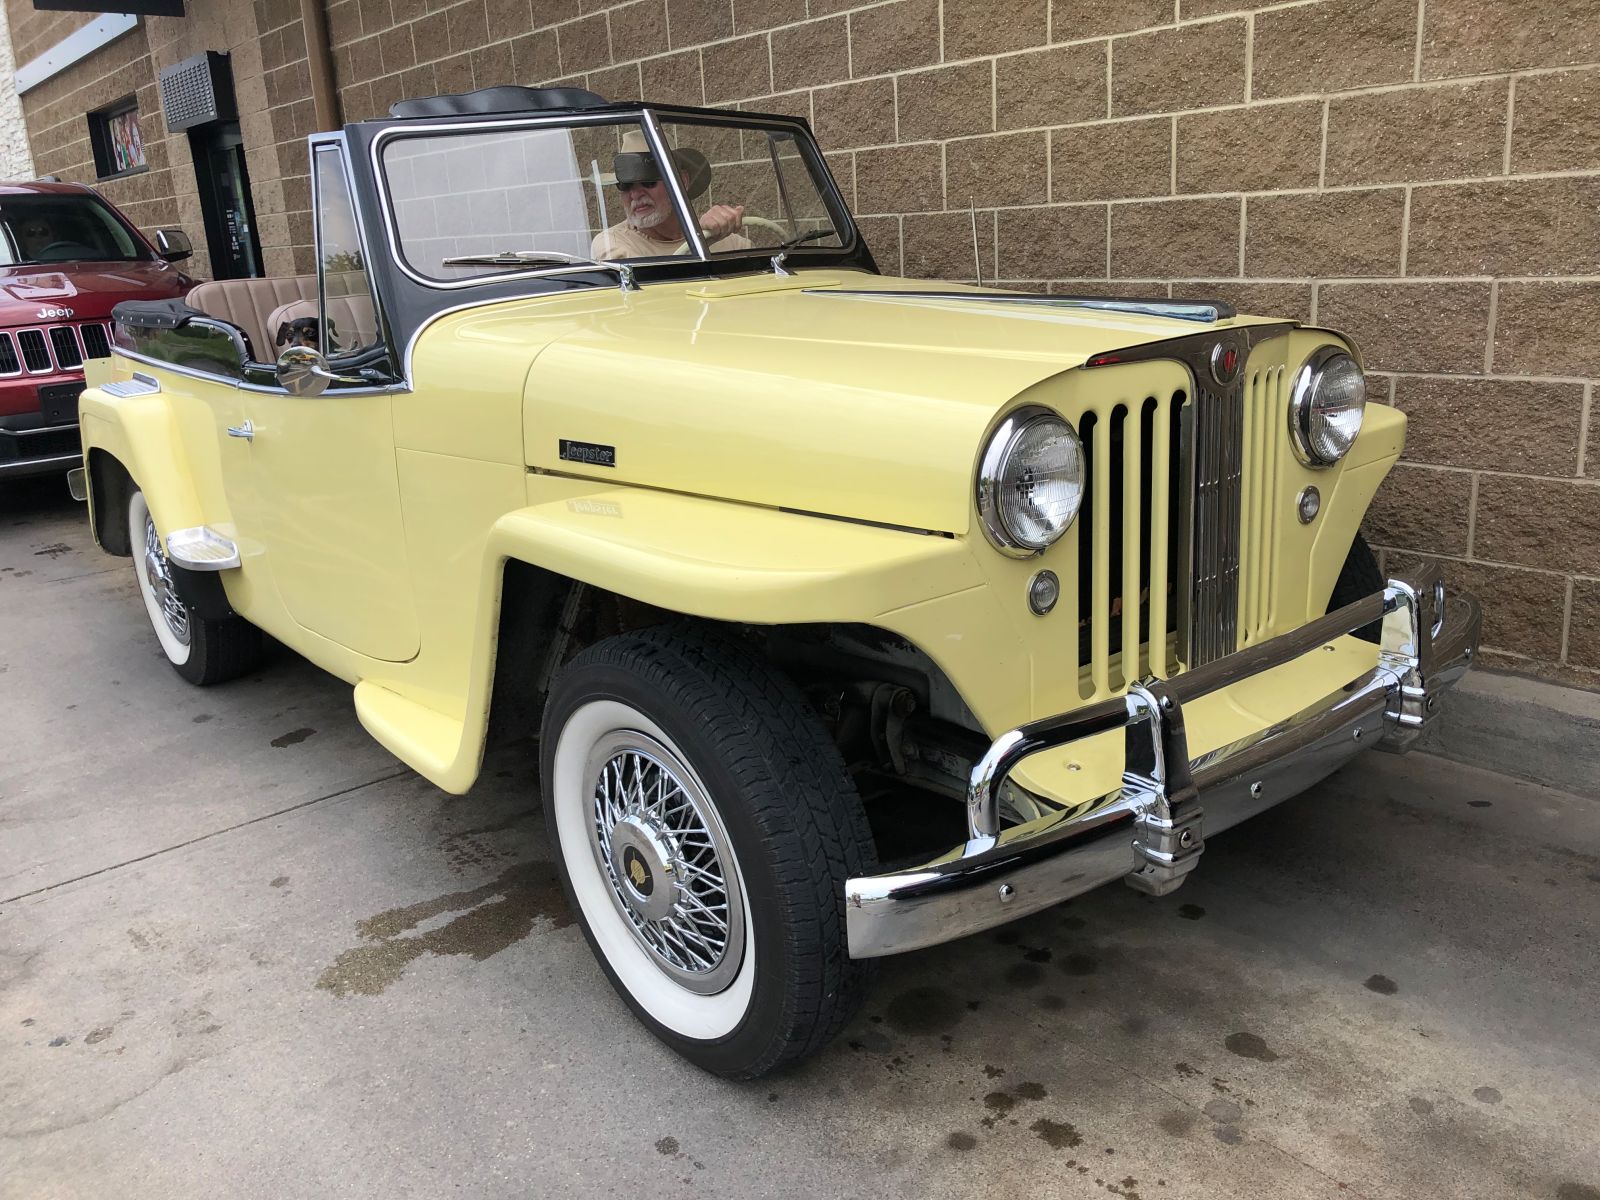 The Willys-Overland Jeepster was the beginning of a beautiful relationship between Brooks Stevens &amp; Jeep